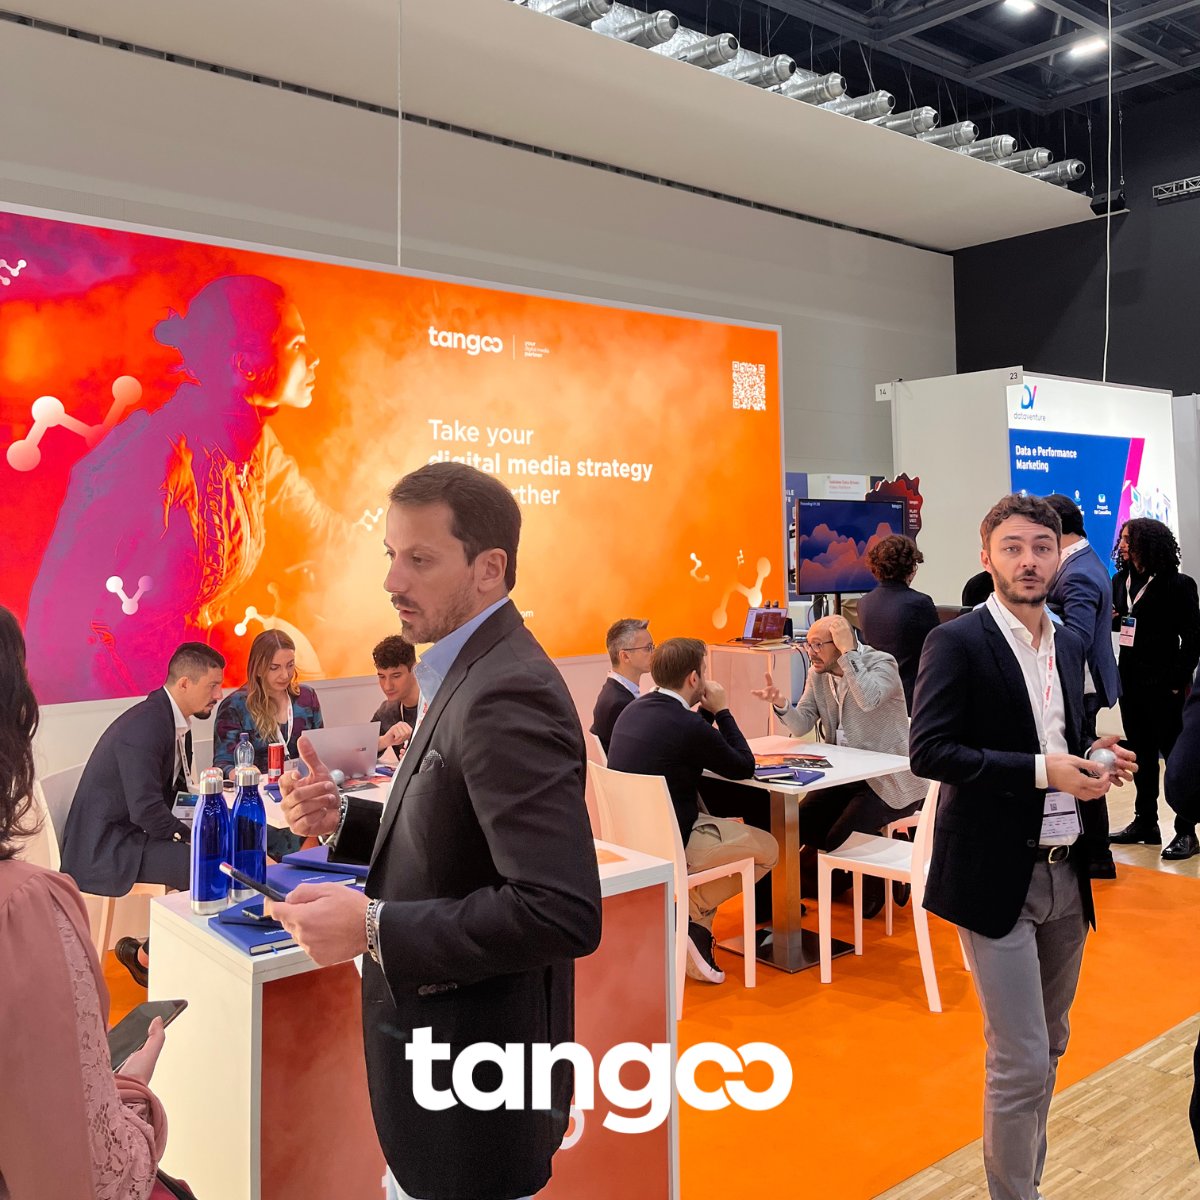 Reflecting on a week of insights from #IABForum! Time flew by since the last #IABForum ended – such an enriching experience! 
Our booth buzzed with great chats and connections. Looking forward to more excitement ahead. Stay connected, and in 2024, more digital strategy...
#Tangoo